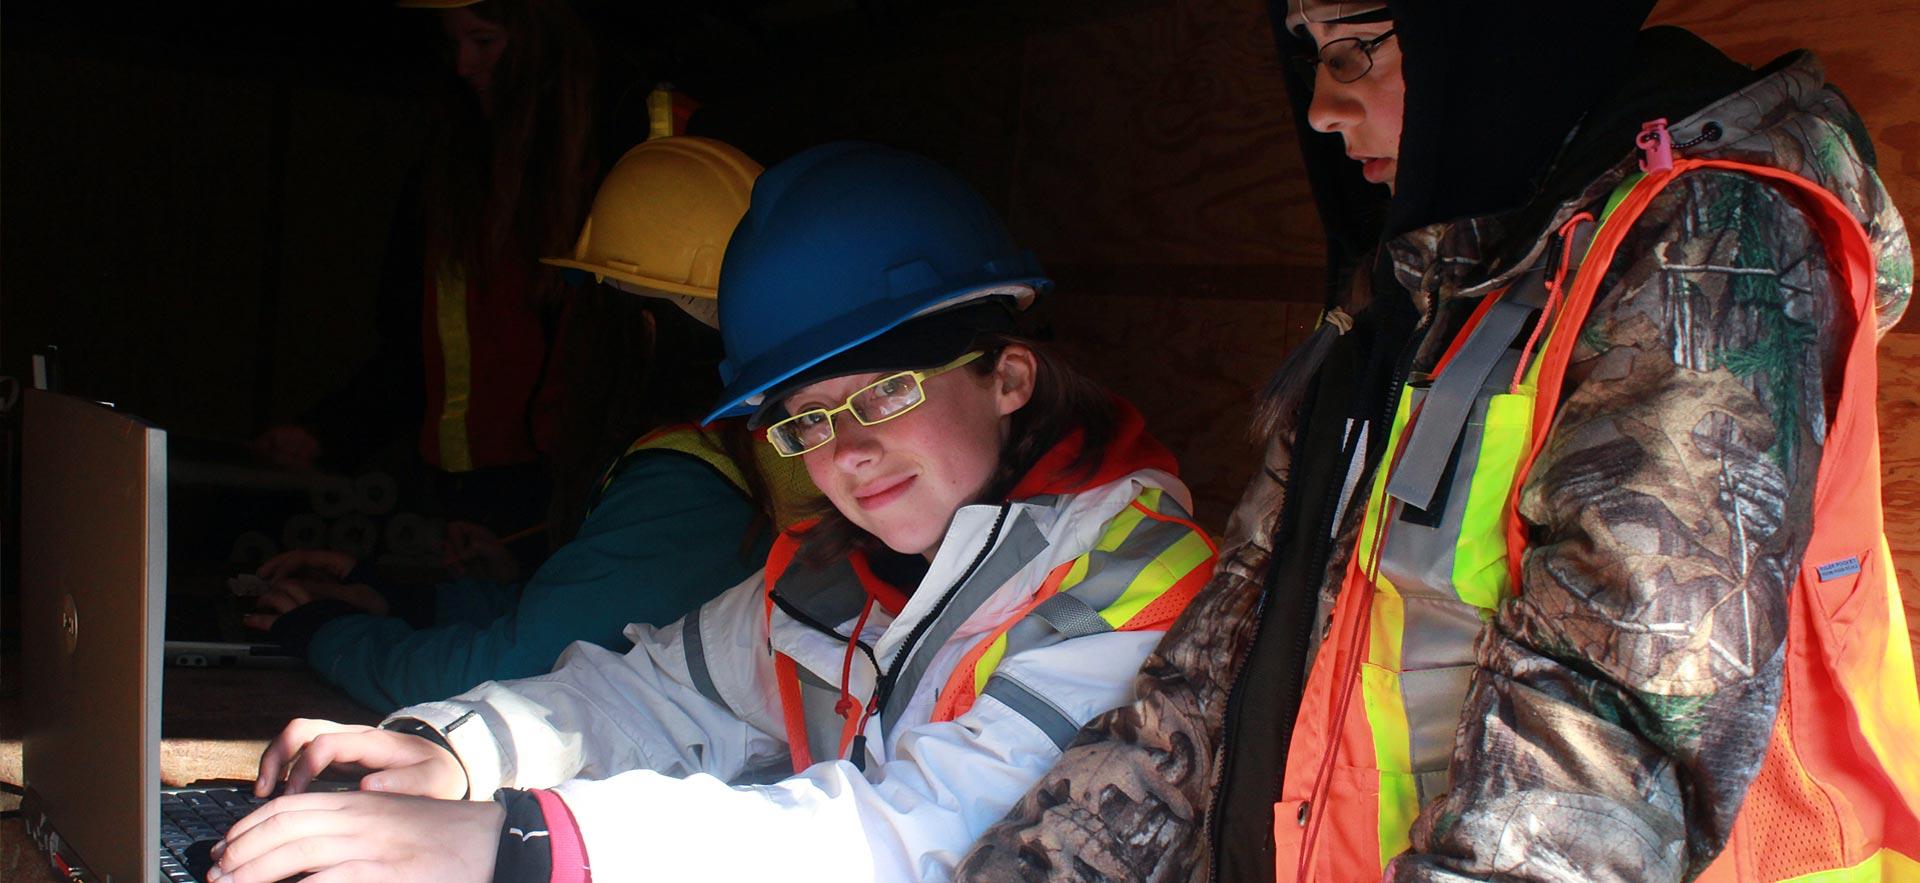 female forestry conservation works on her laptop during a field trip.